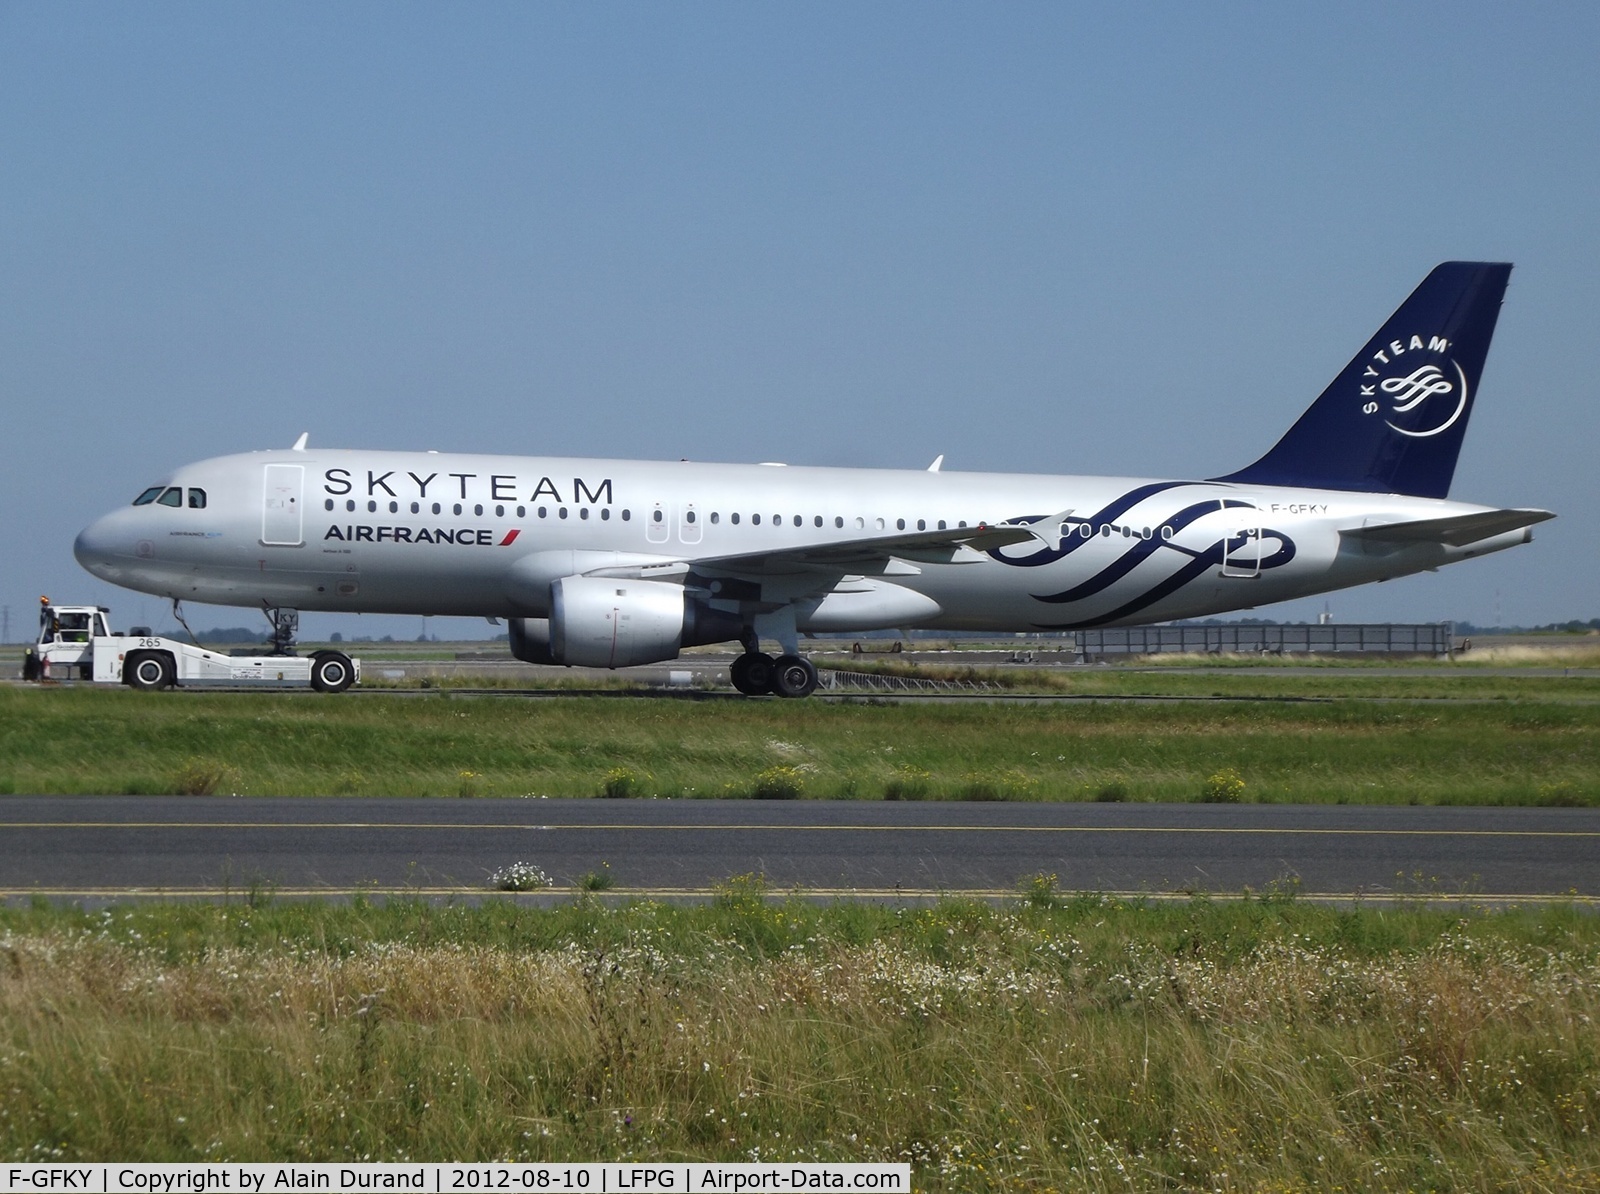 F-GFKY, 1991 Airbus A320-211 C/N 0285, Leased to Vietnam Airlines from 1994 until 1996, veteran Kilo-Yankee gained an appointement as a permanant Skyteam ambassador in July 2012.